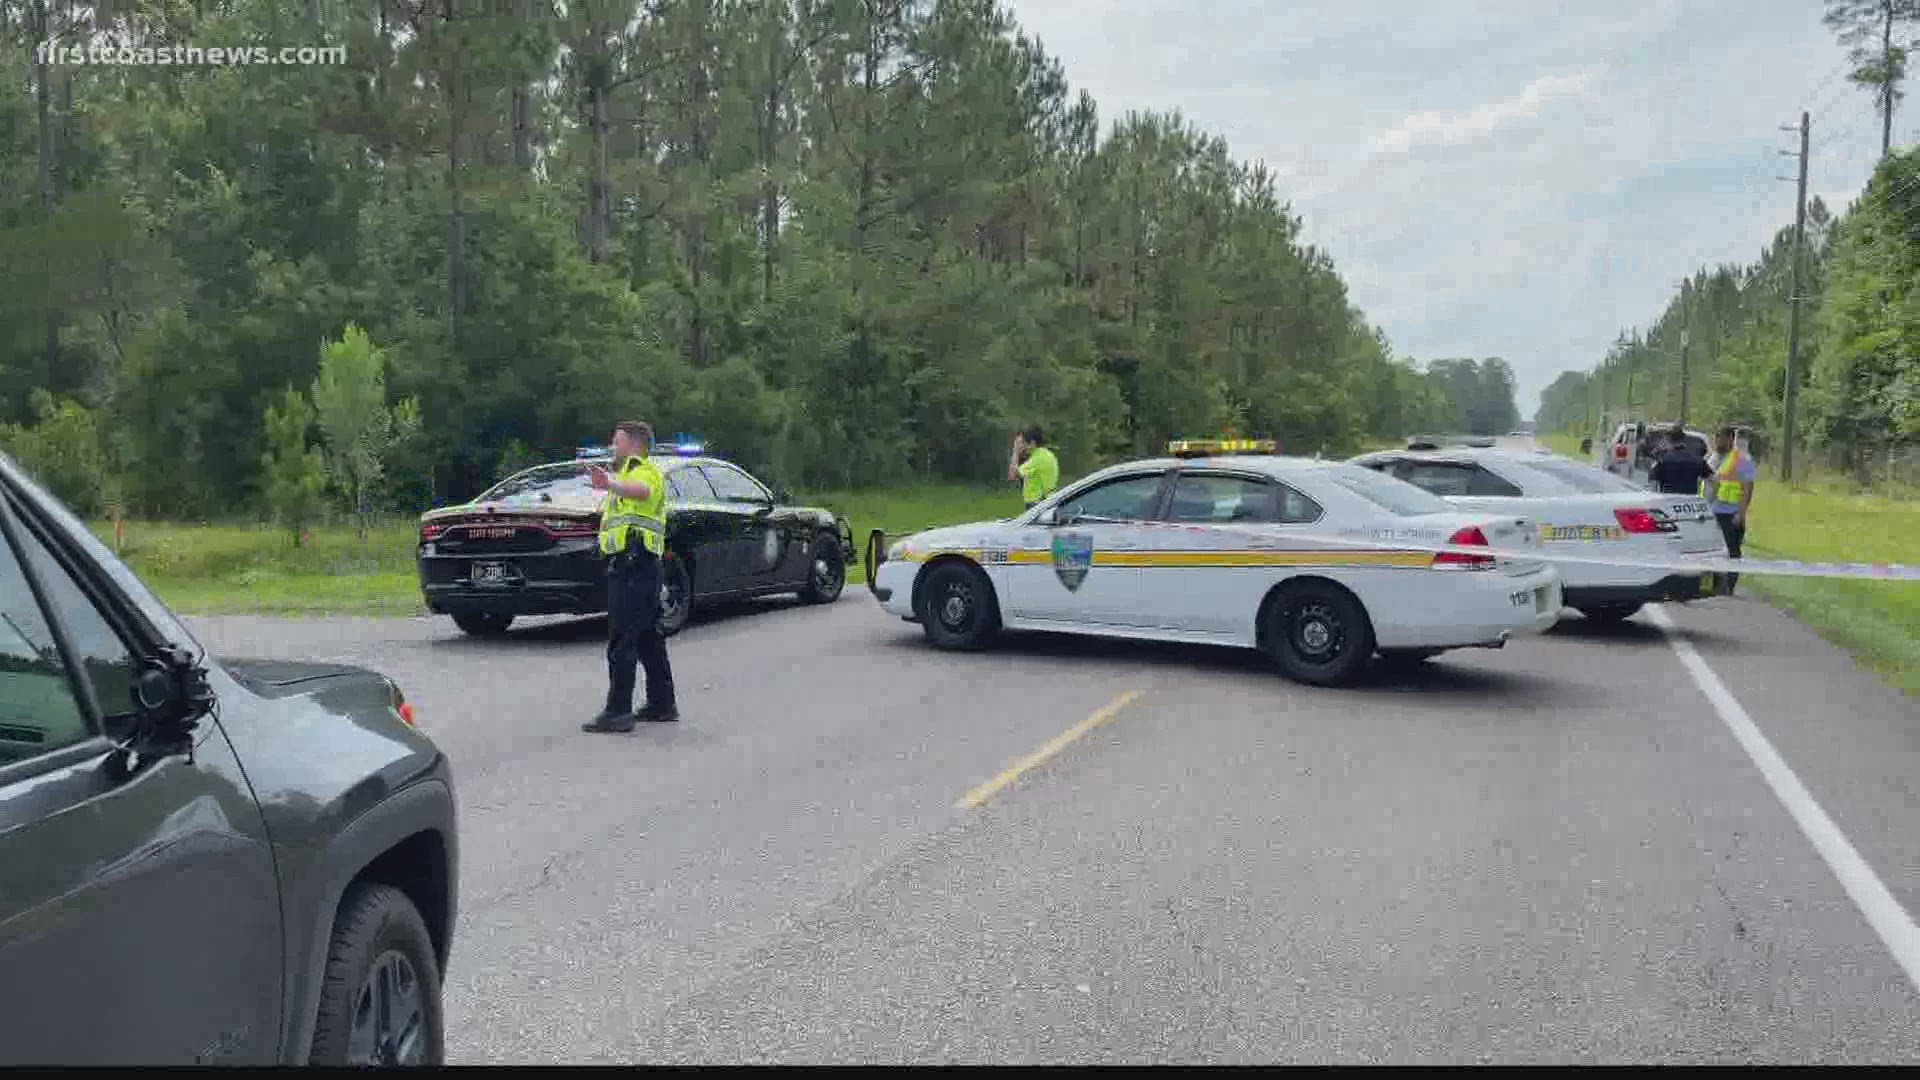 The crash happened on Lem Turner Road around 3 p.m., when a car and motorcycle collided. One person died and several others were taken to the hospital.